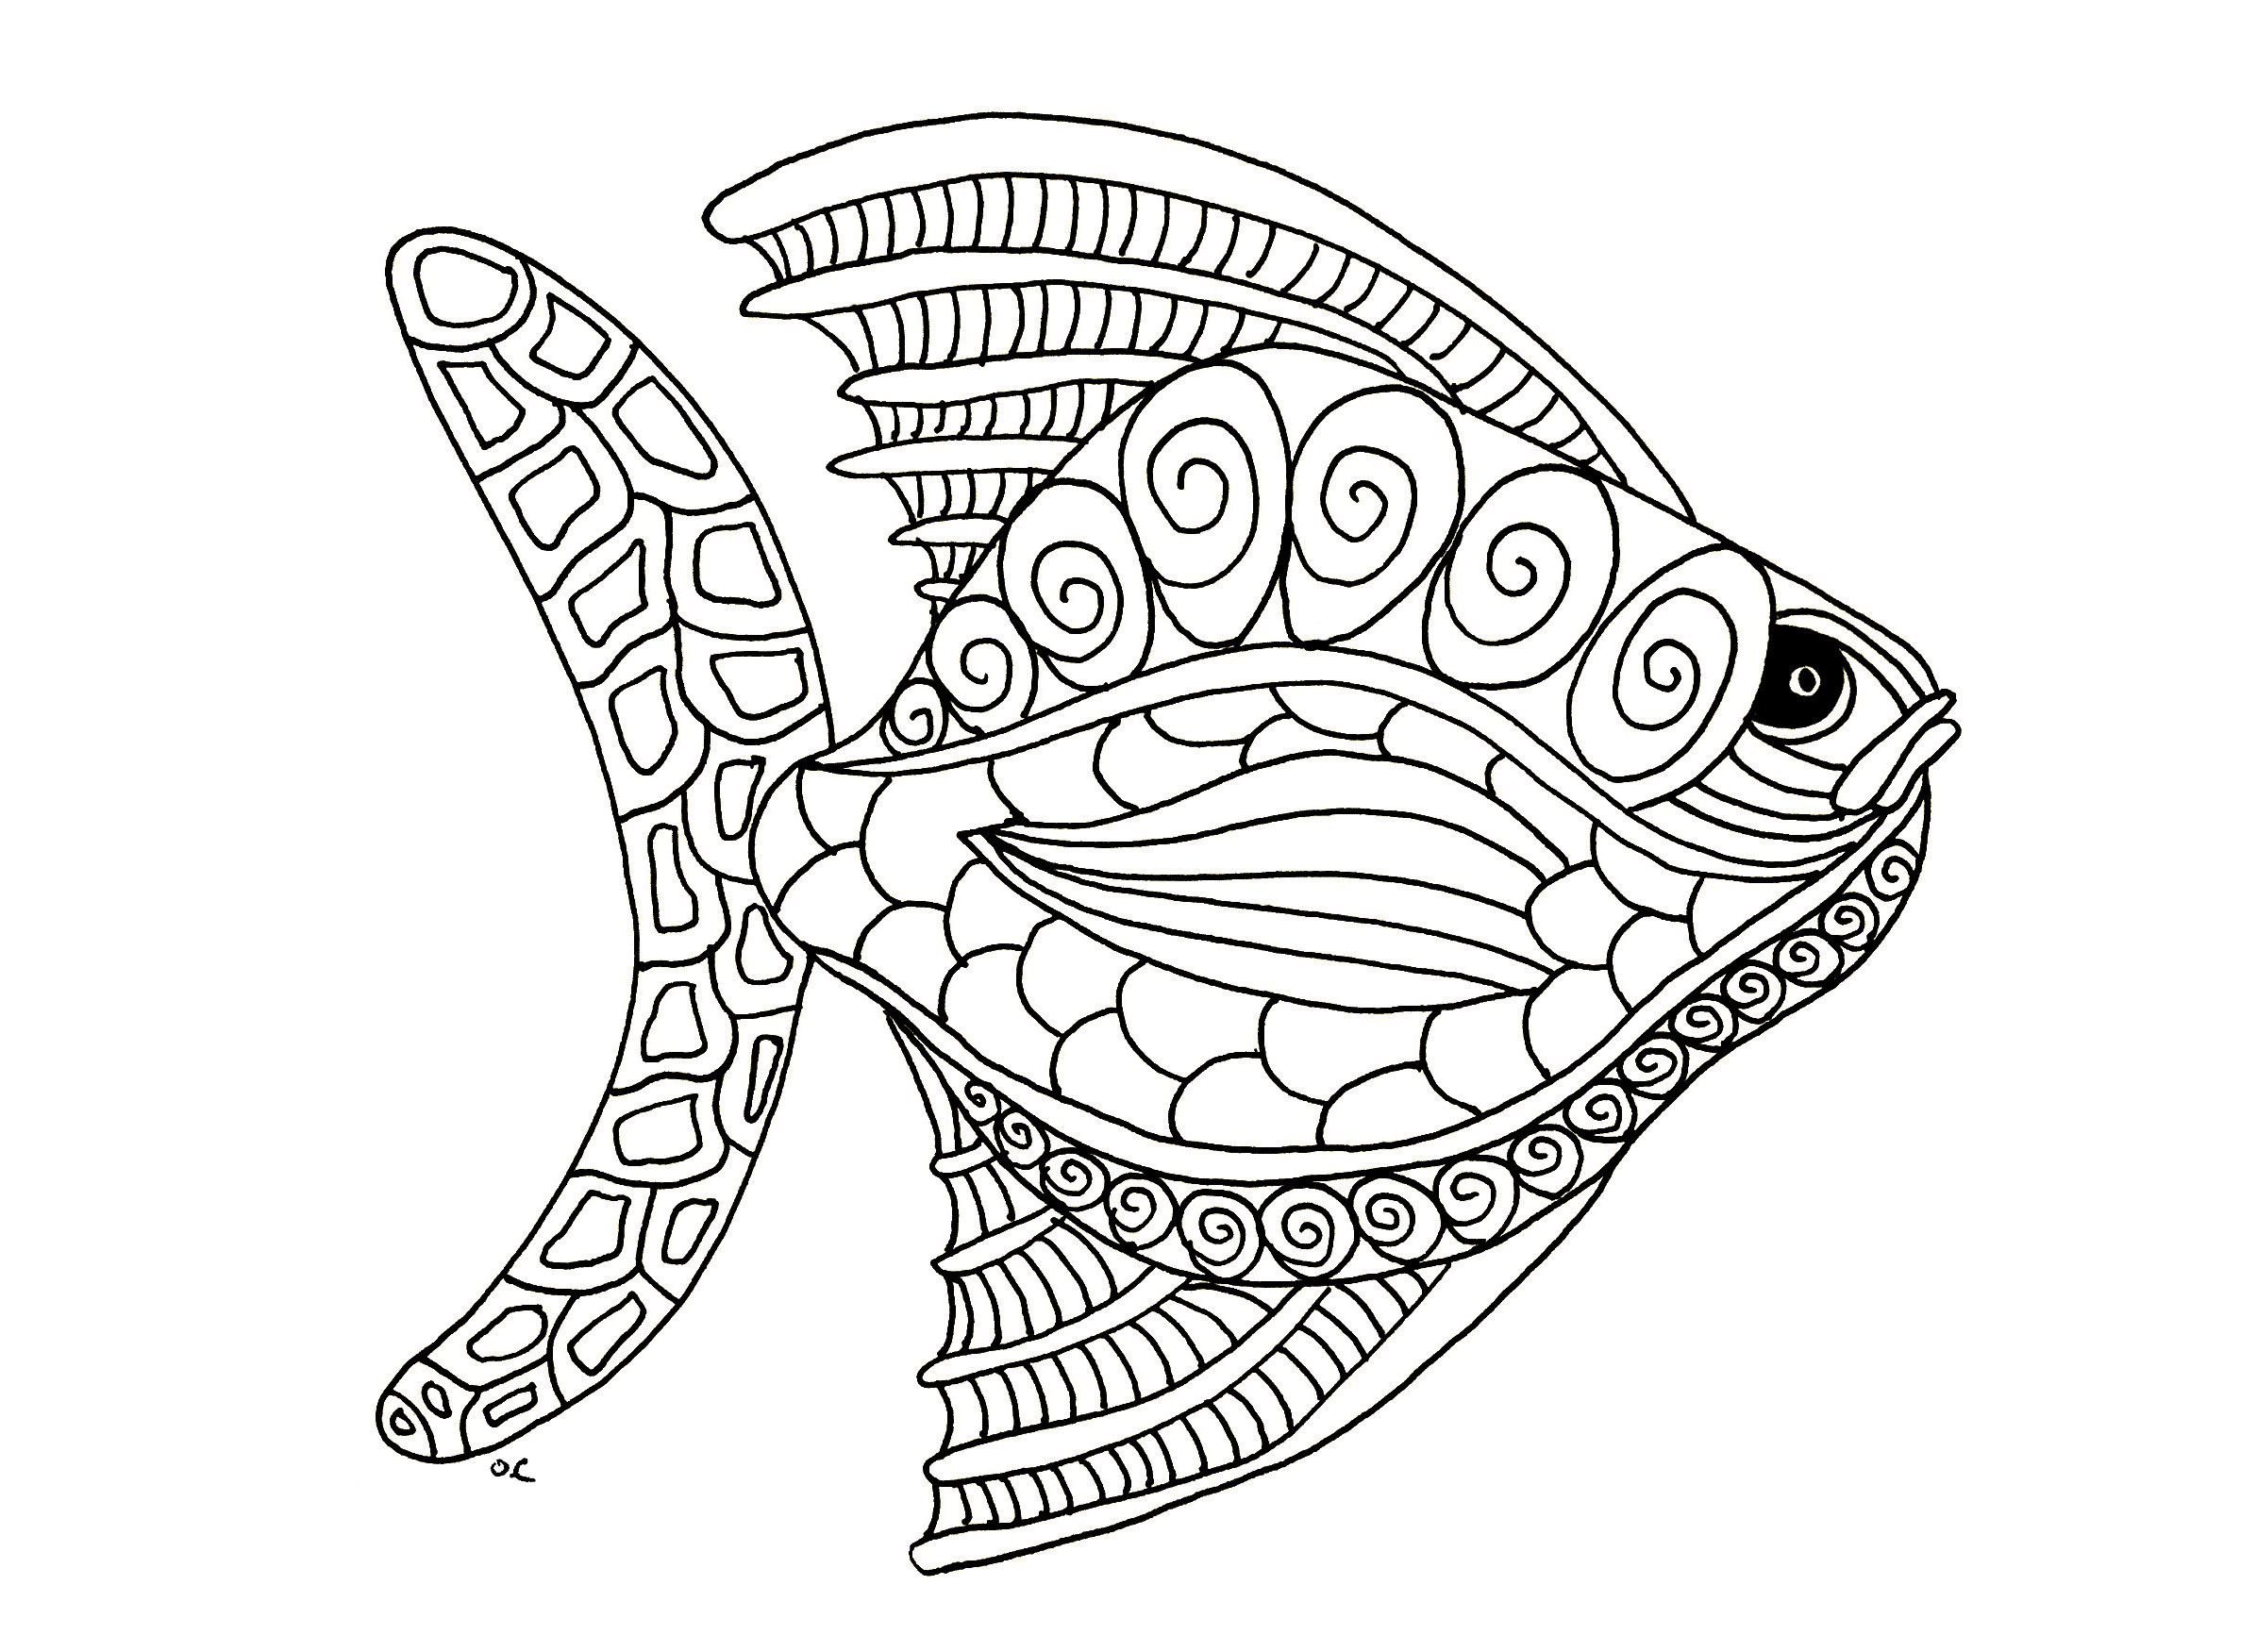 Animal Coloring Pages For Adults
 Free coloring page coloring fish zentangle step 1 by